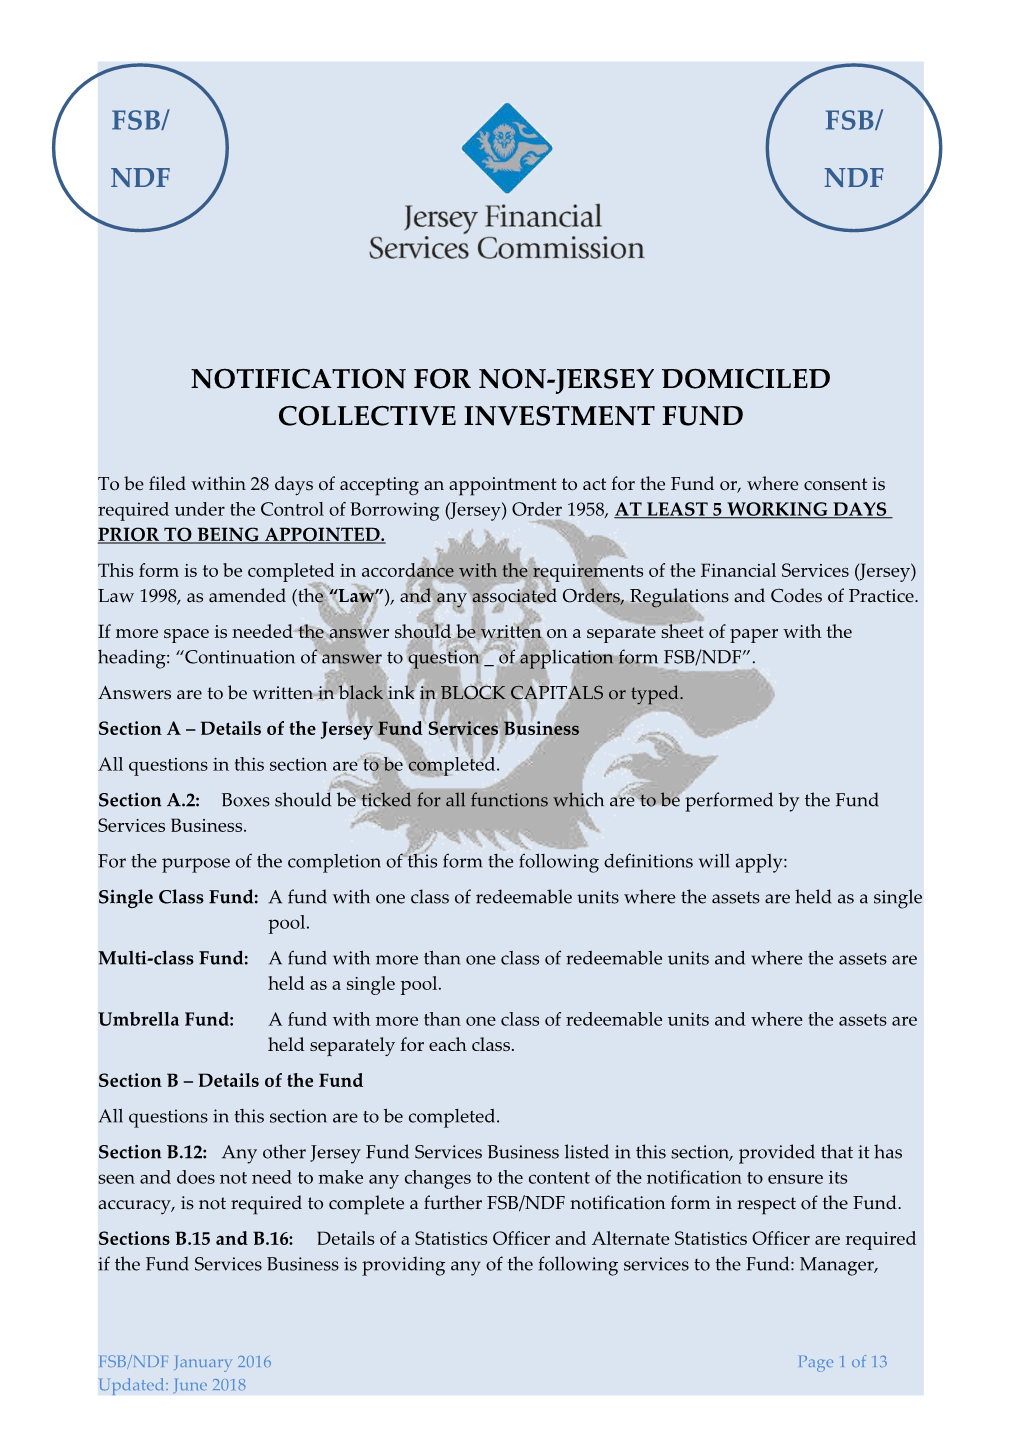 NOTIFICATION for NON-JERSEY DOMICILED COLLECTIVE INVESTMENT FUND